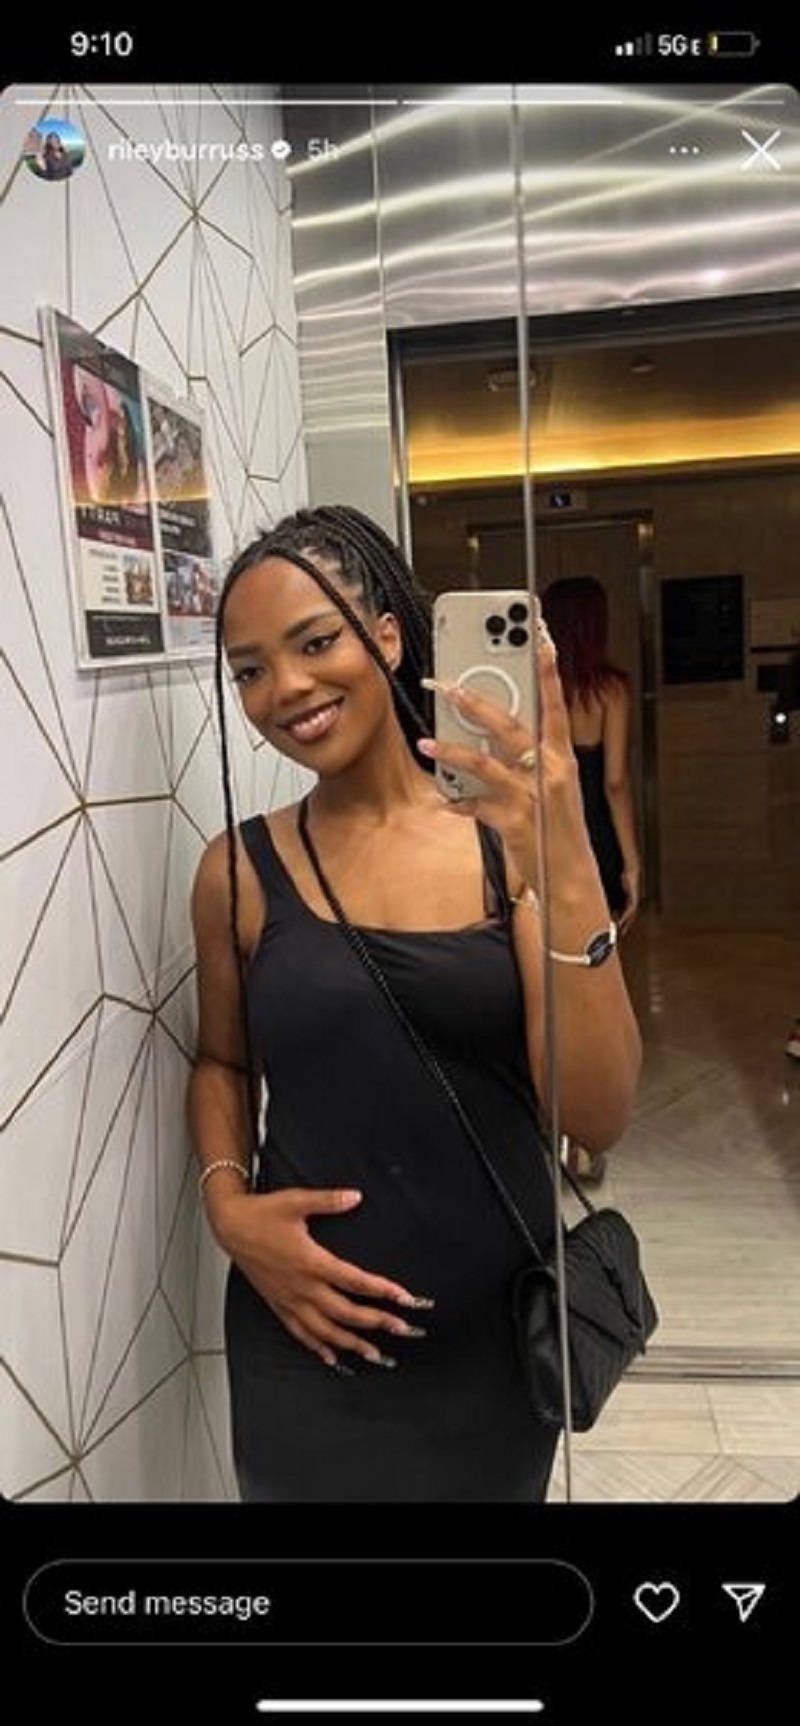 Riley Burruss' IG photo has fans thinking she is pregnant